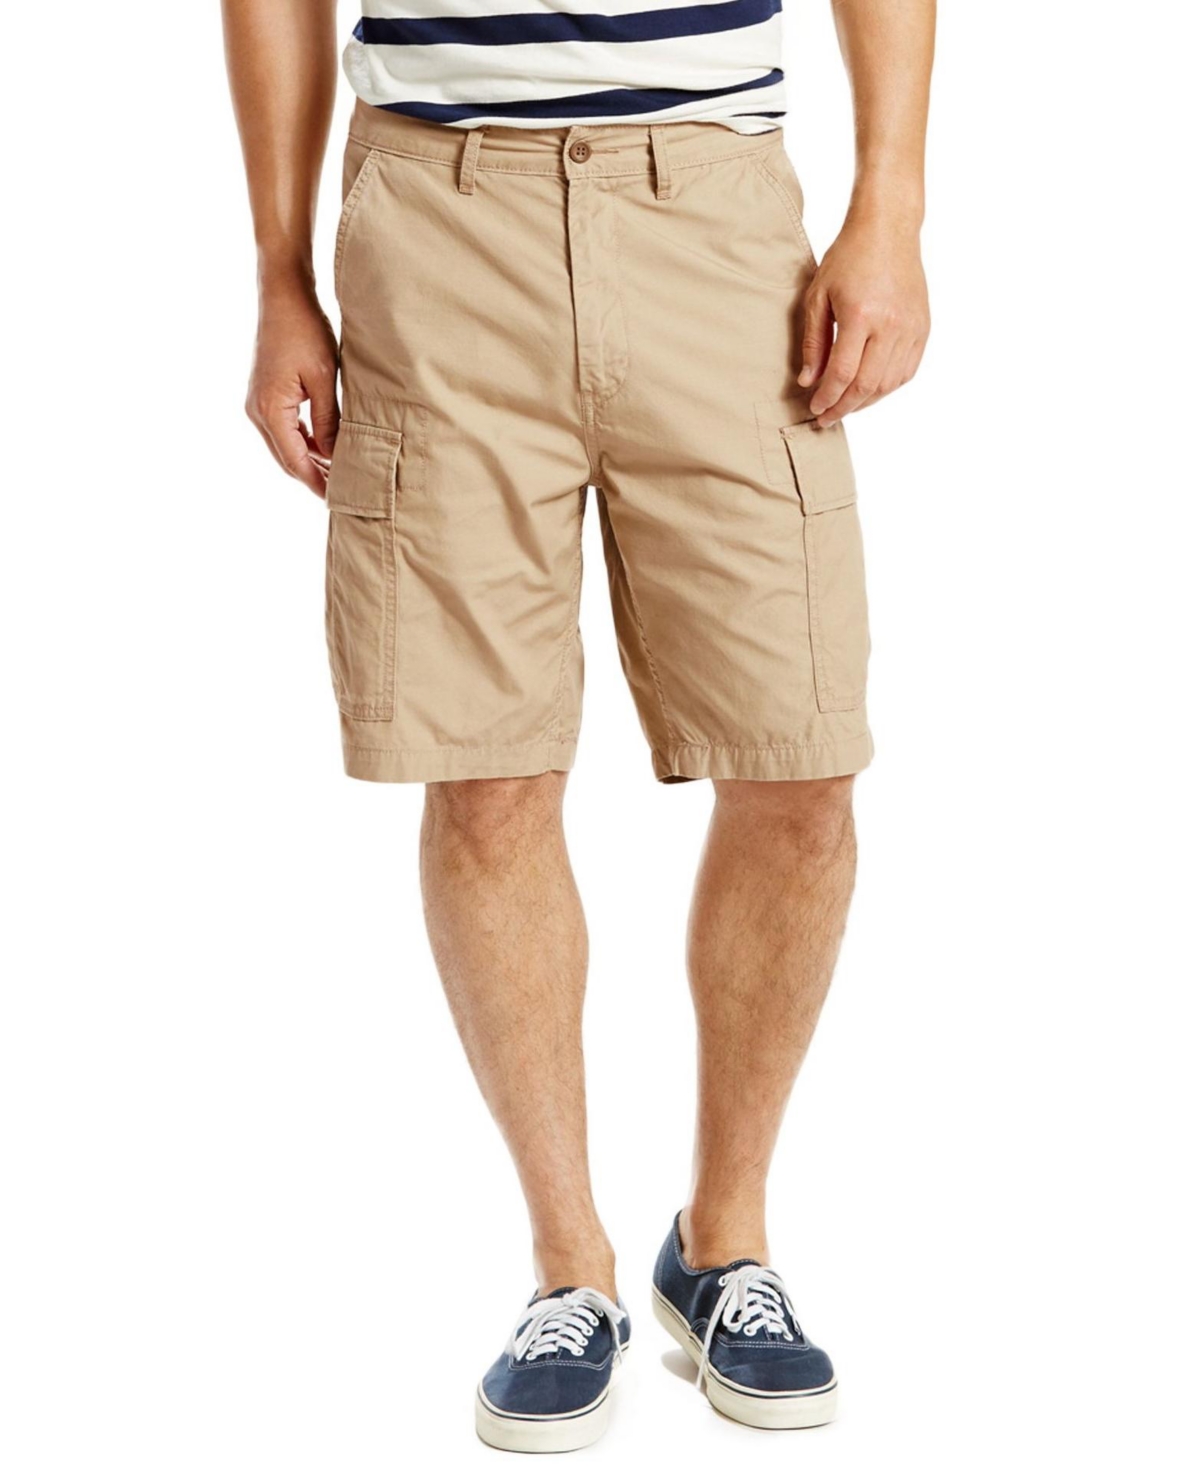 UPC 193239697308 product image for Levi's Men's Big and Tall Loose Fit Carrier Cargo Shorts | upcitemdb.com